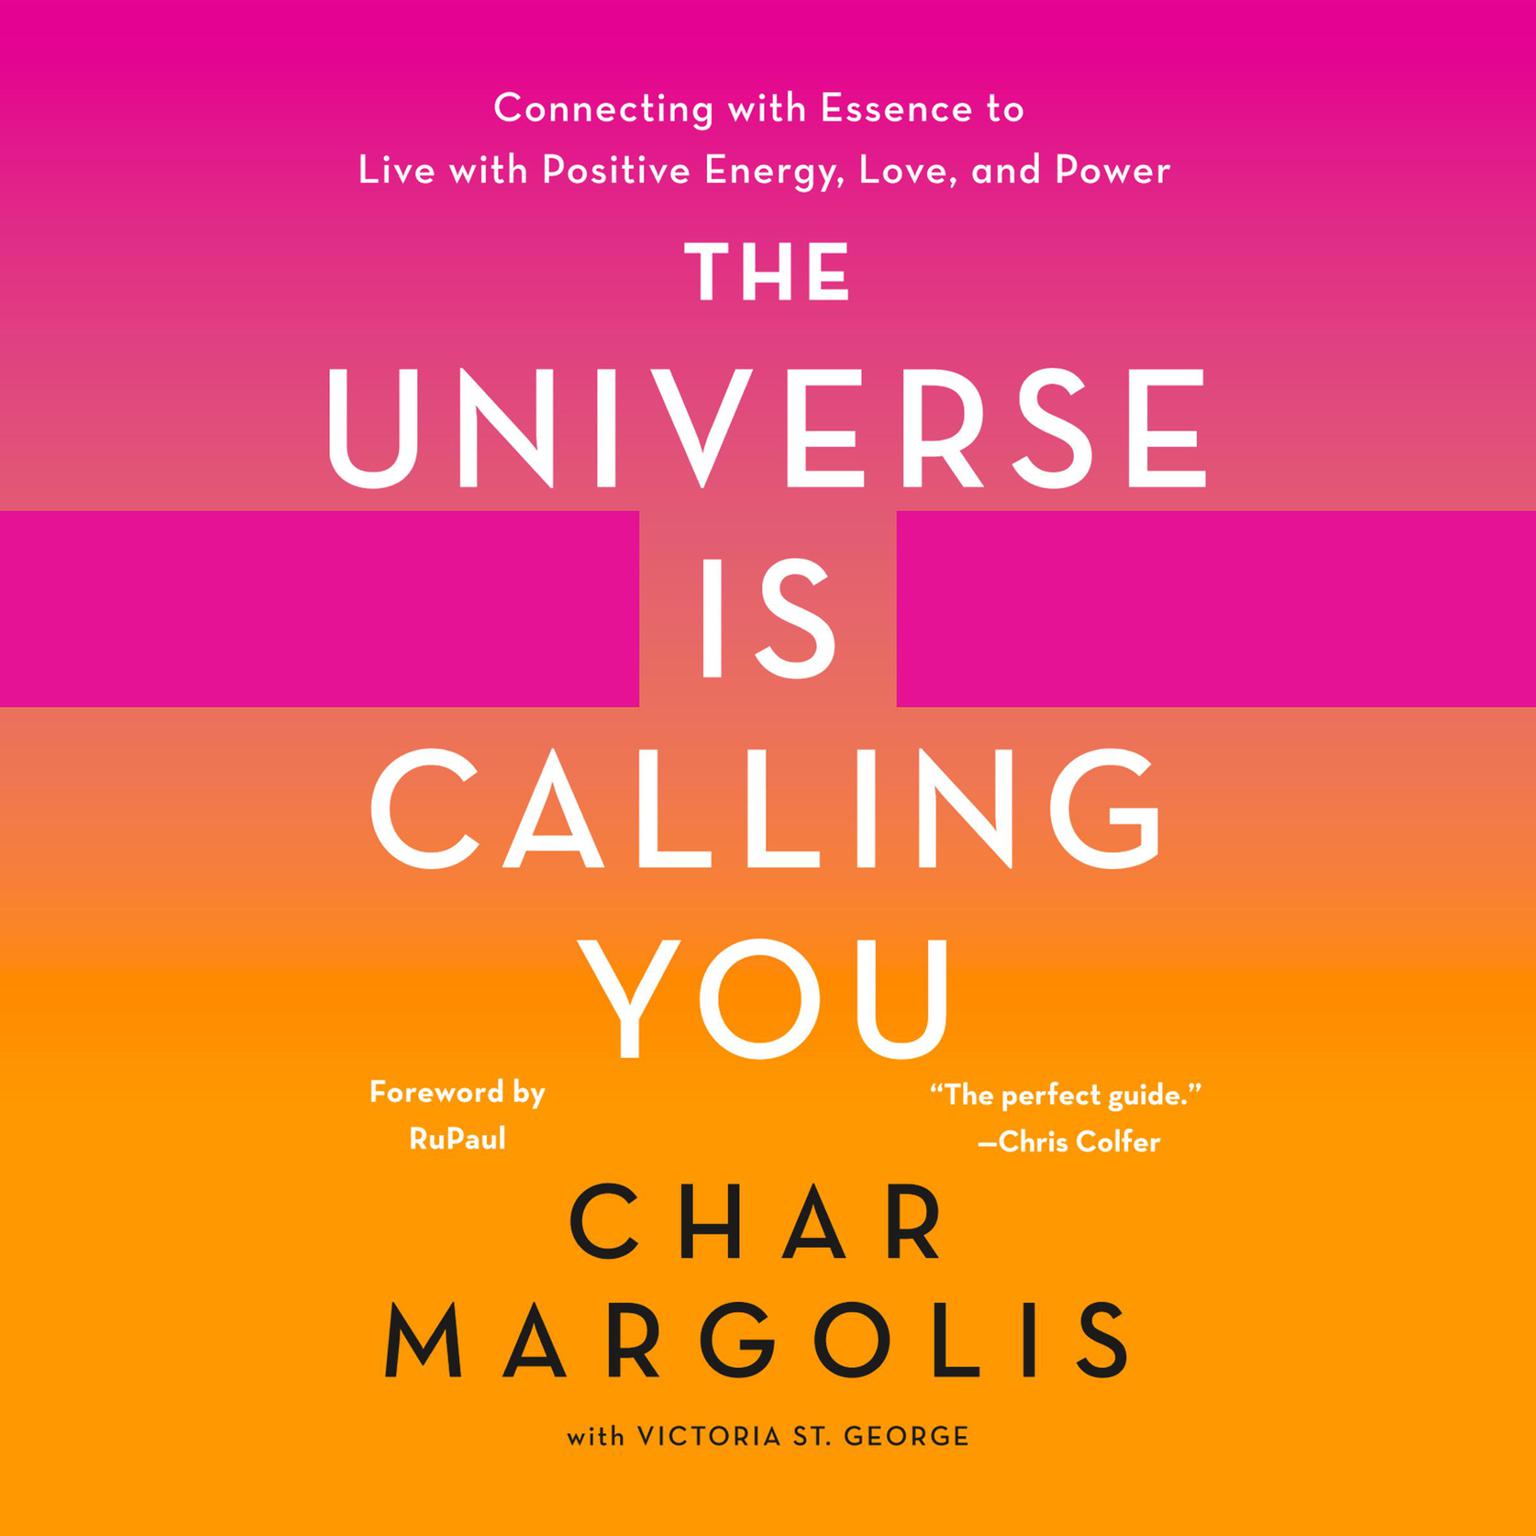 The Universe Is Calling You: Connecting with Essence to Live with Positive Energy, Love, and Power Audiobook, by Char Margolis